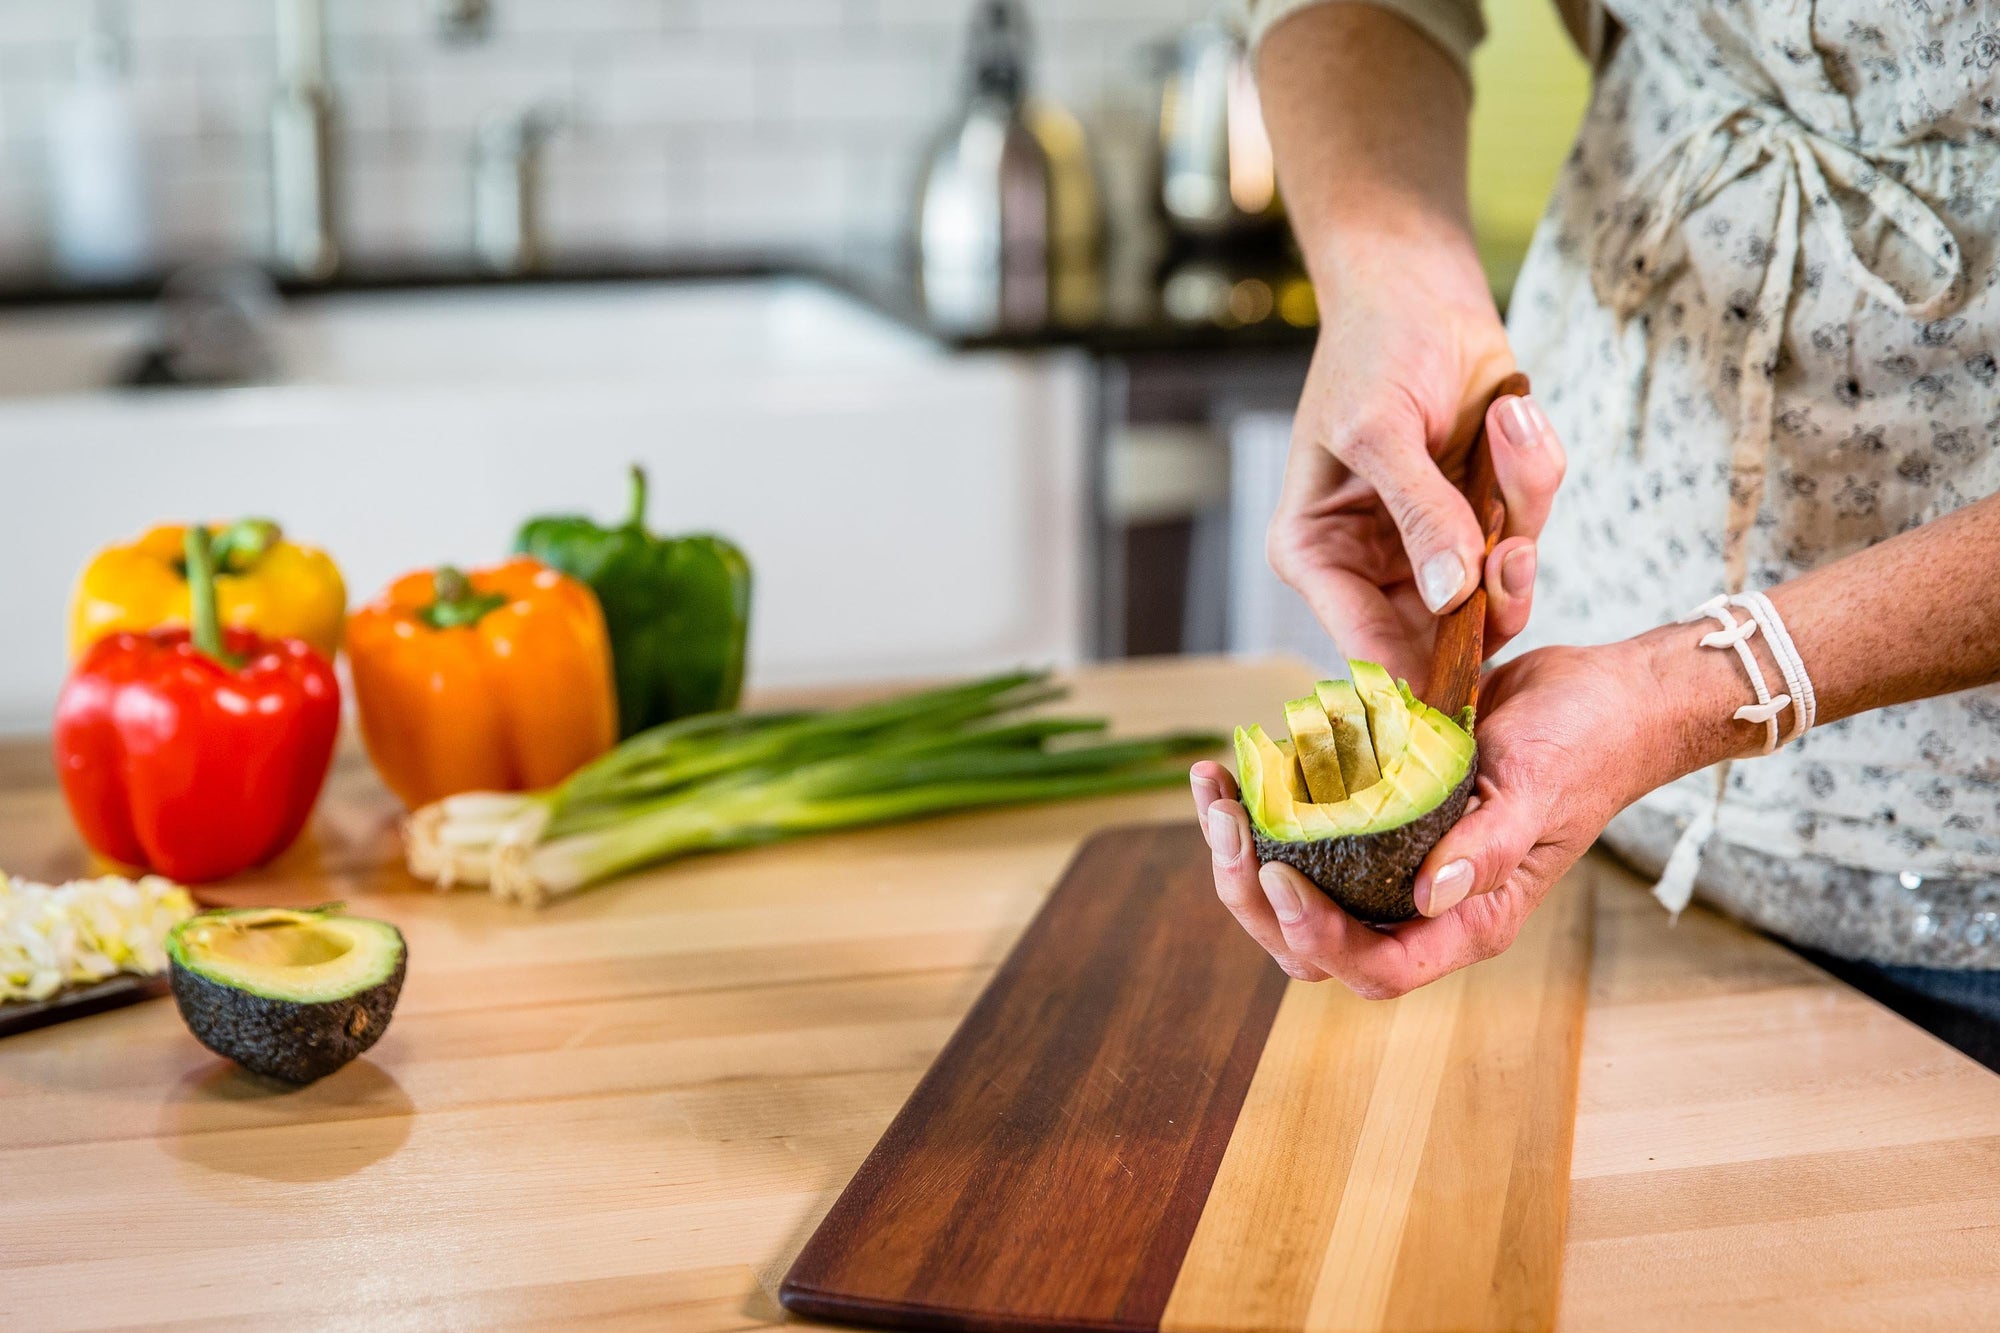 wood avocado knife and scoop - Earlywood